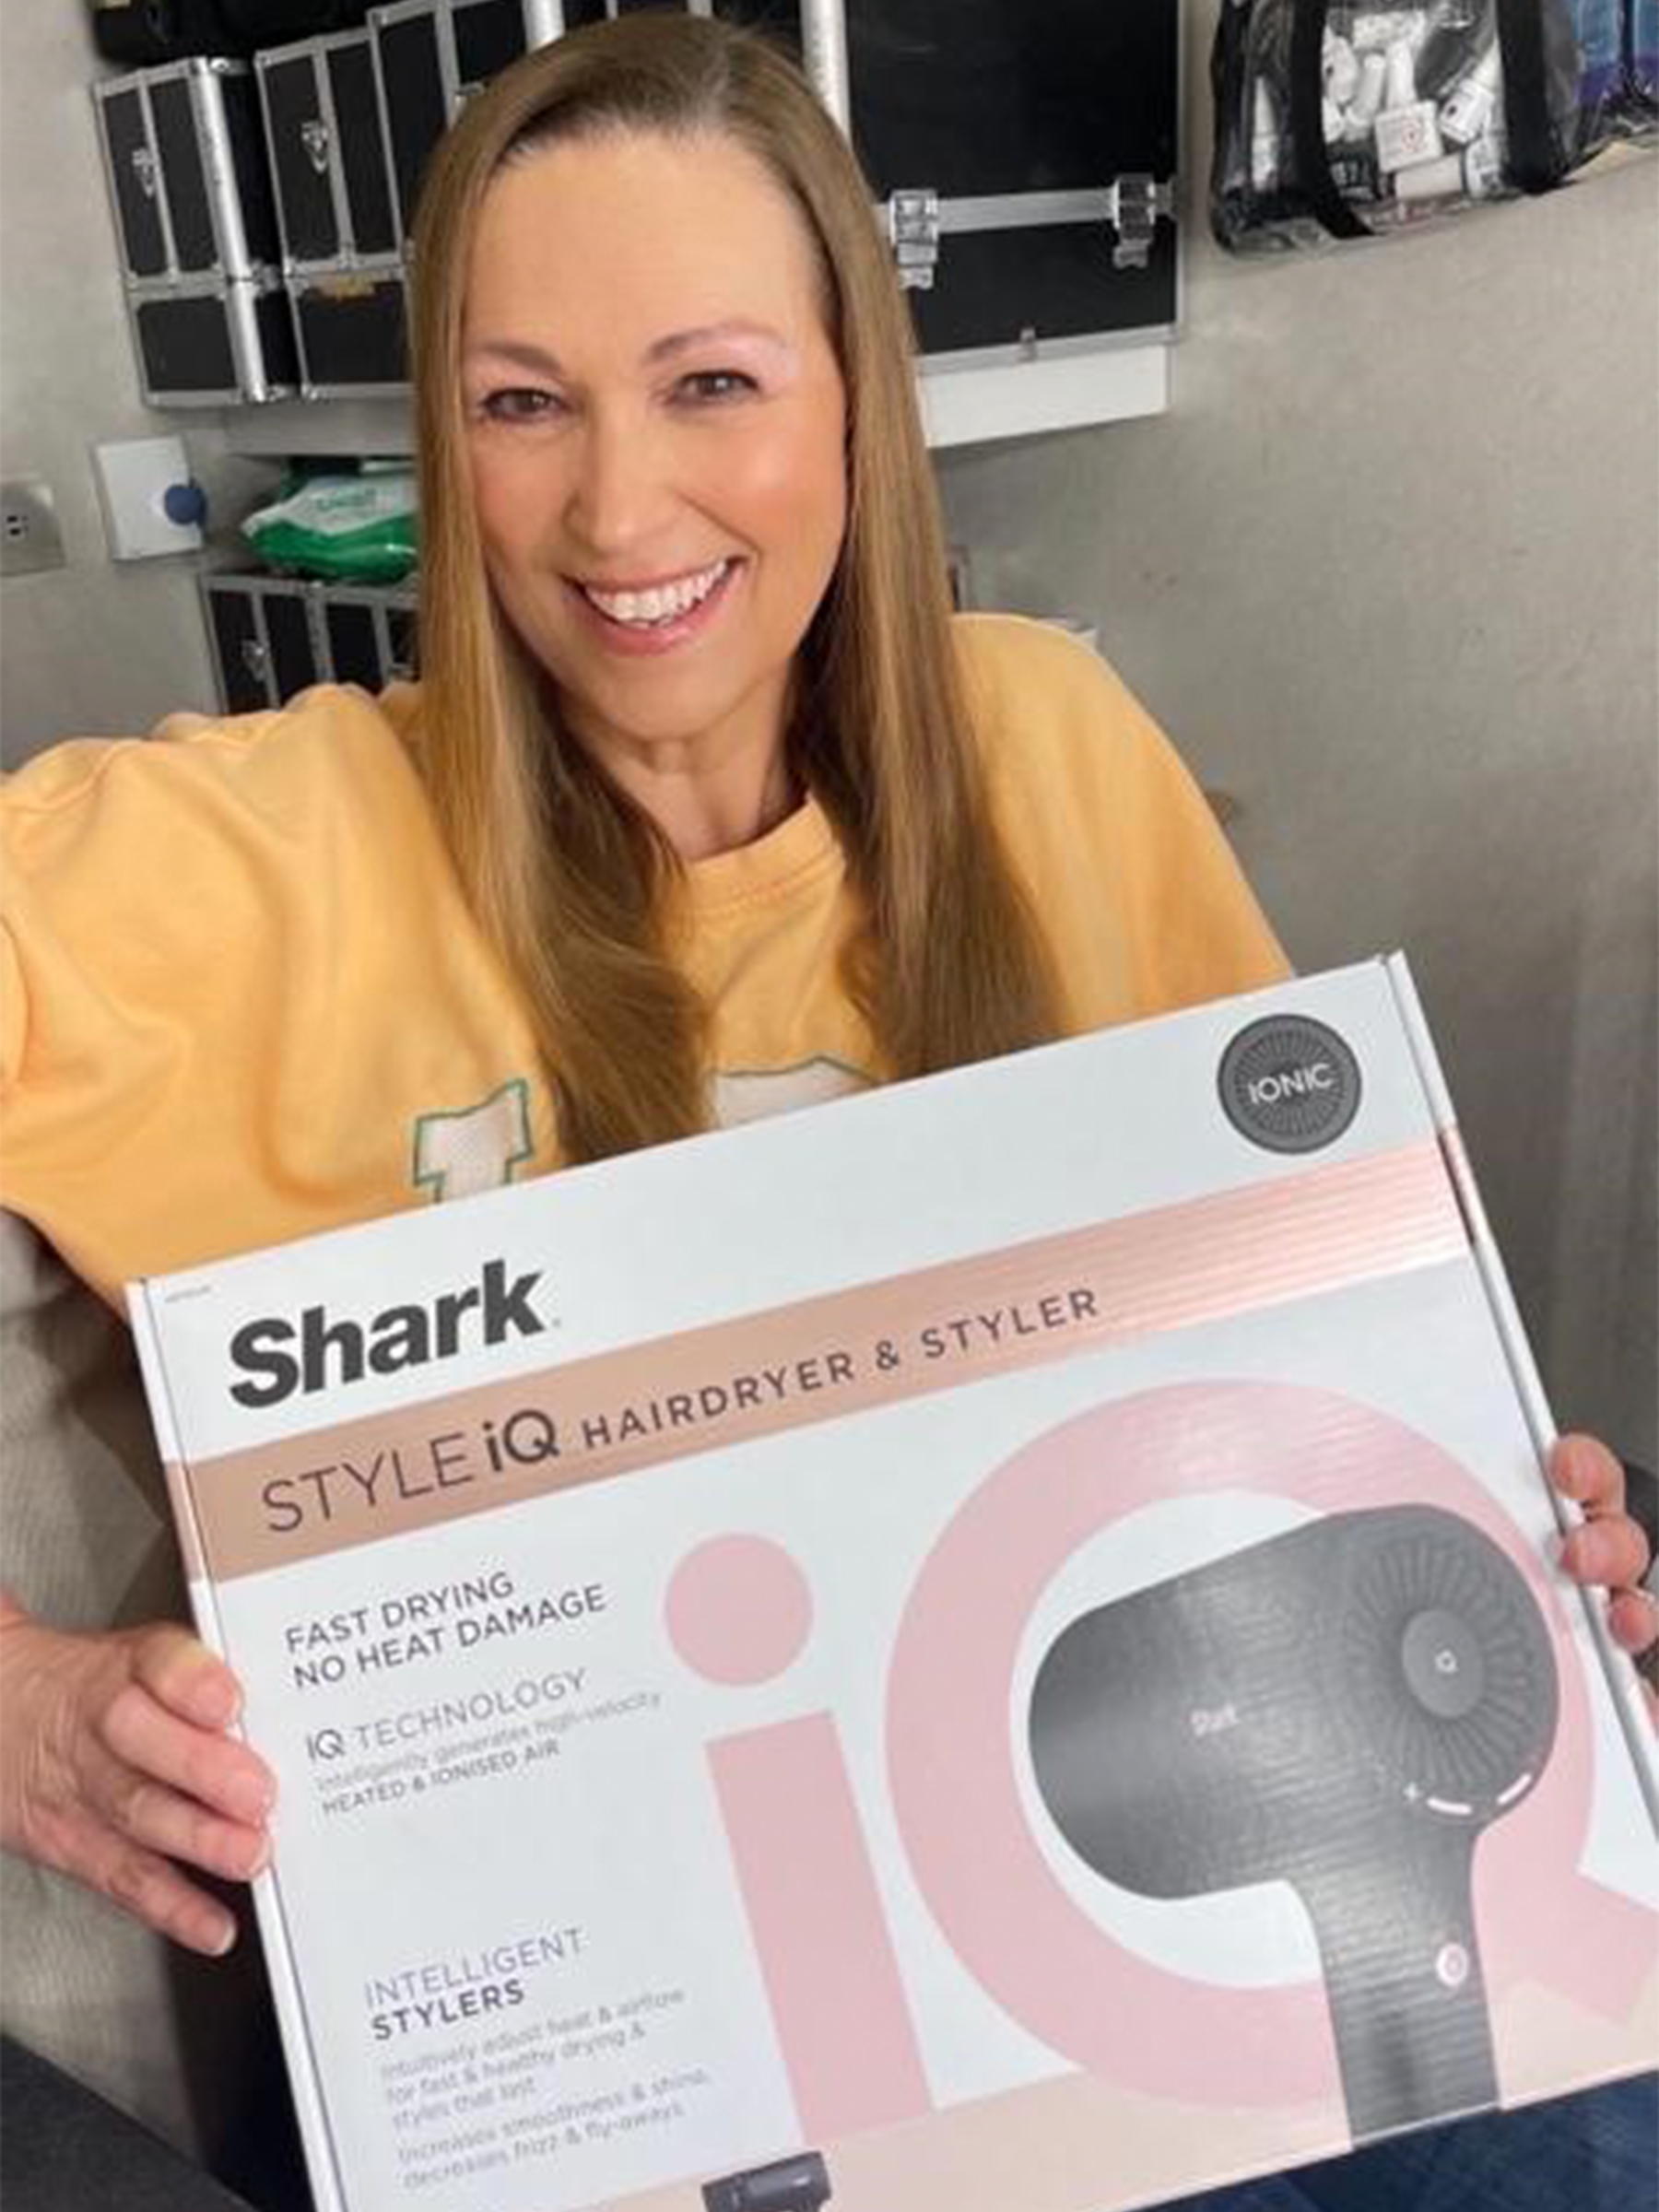 Jilly with the Shark hairdryer box